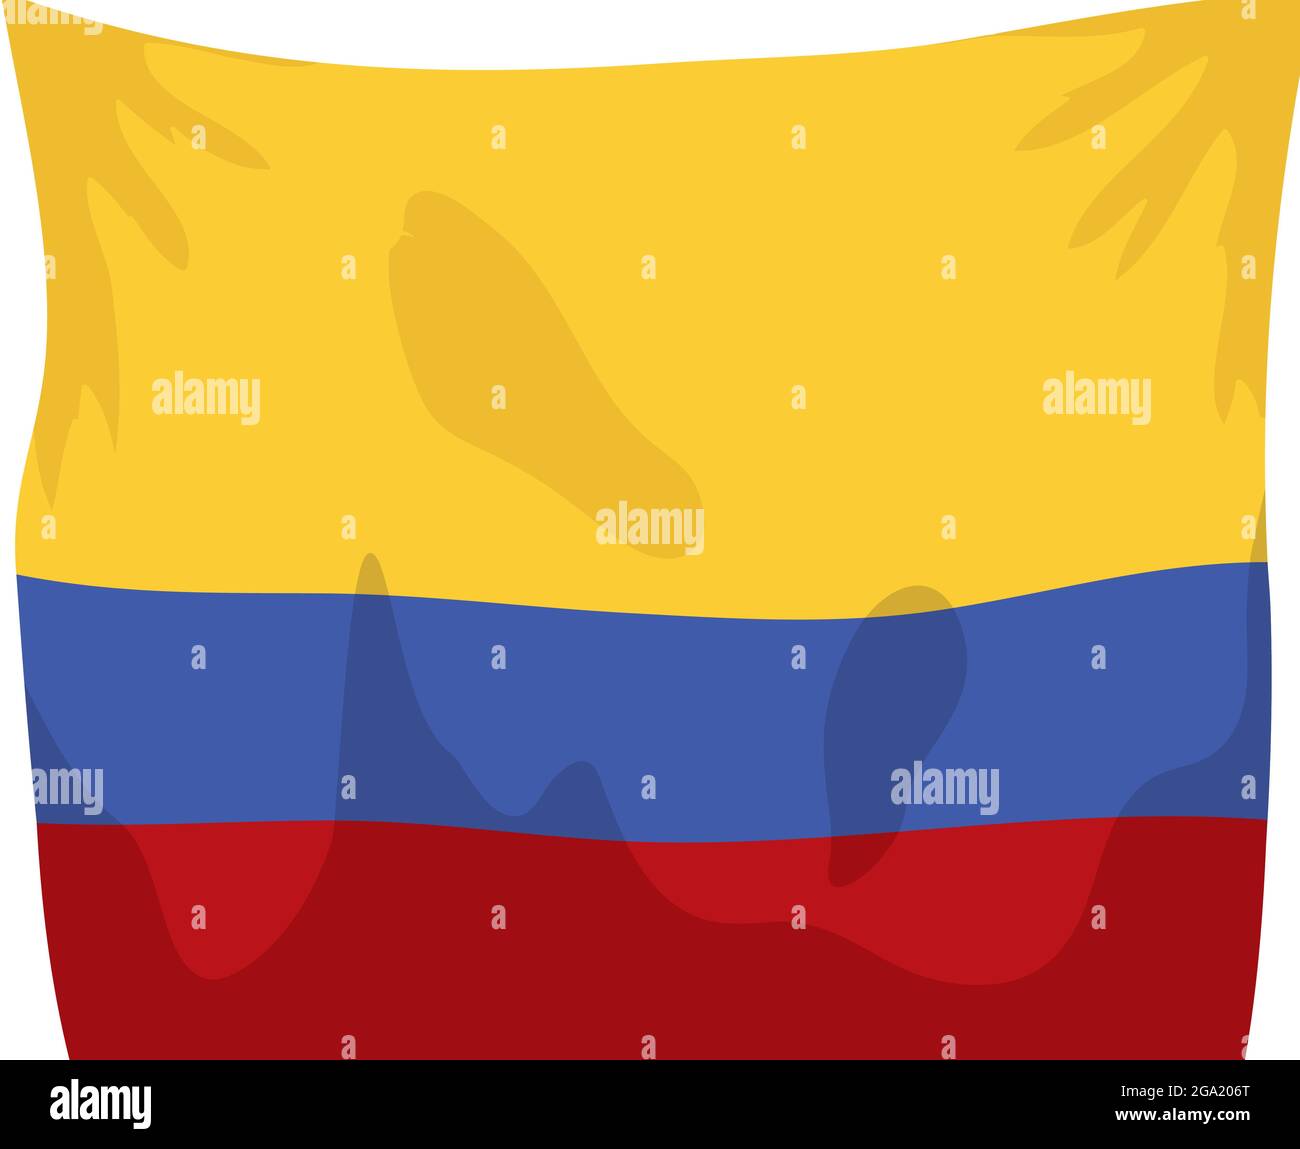 Isolated waving fabric, hanging from its borders with Colombia flag colors. Stock Vector